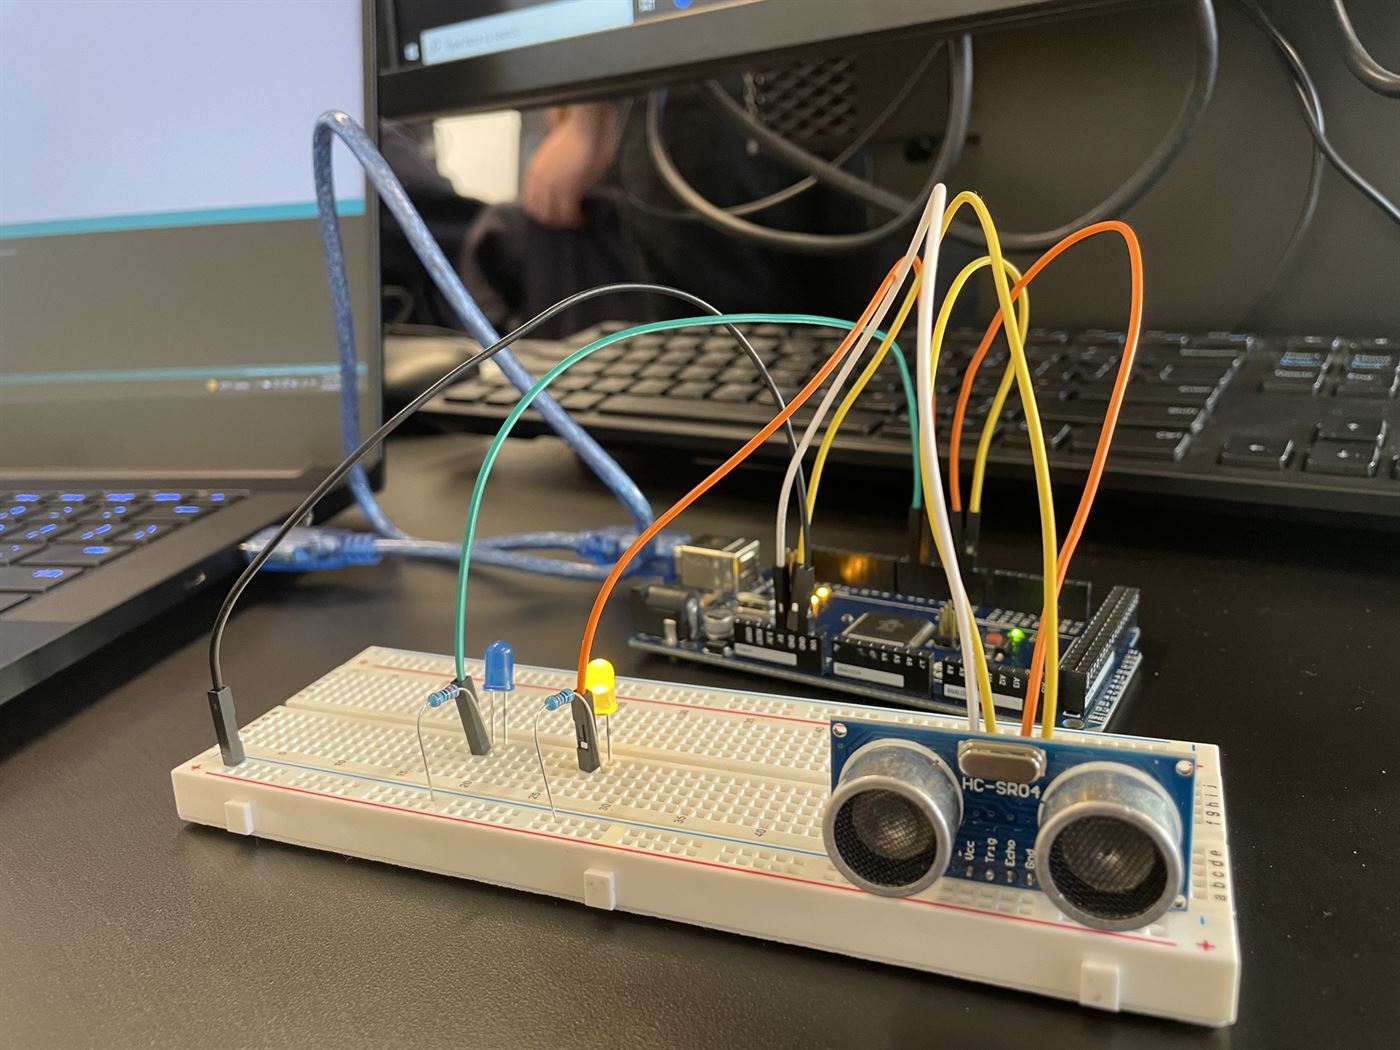 Each participating member was given a small box of equipment featuring an Arduino Mega 2560. Amanda Alicea | The Montclarion